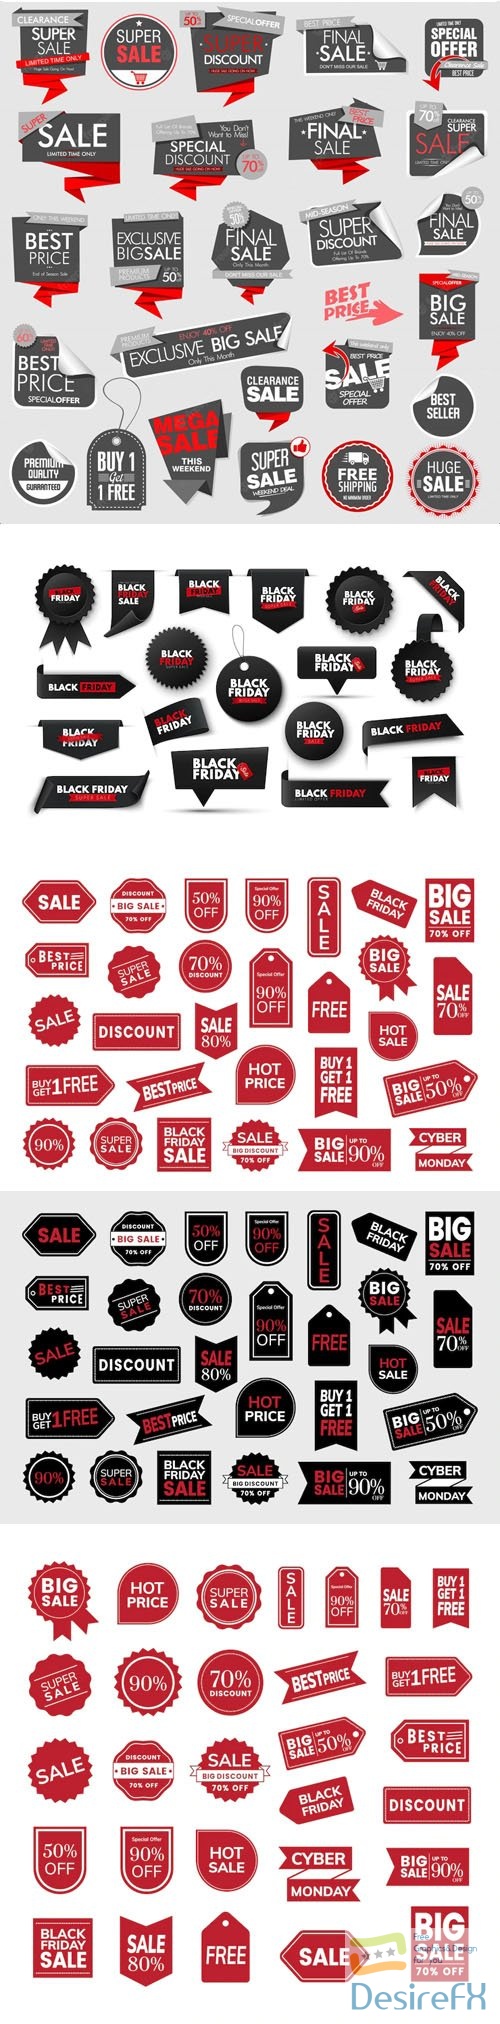 Black Friday - 100+ Shopping Sale Badges & Stickers Vector Templates Vol.3